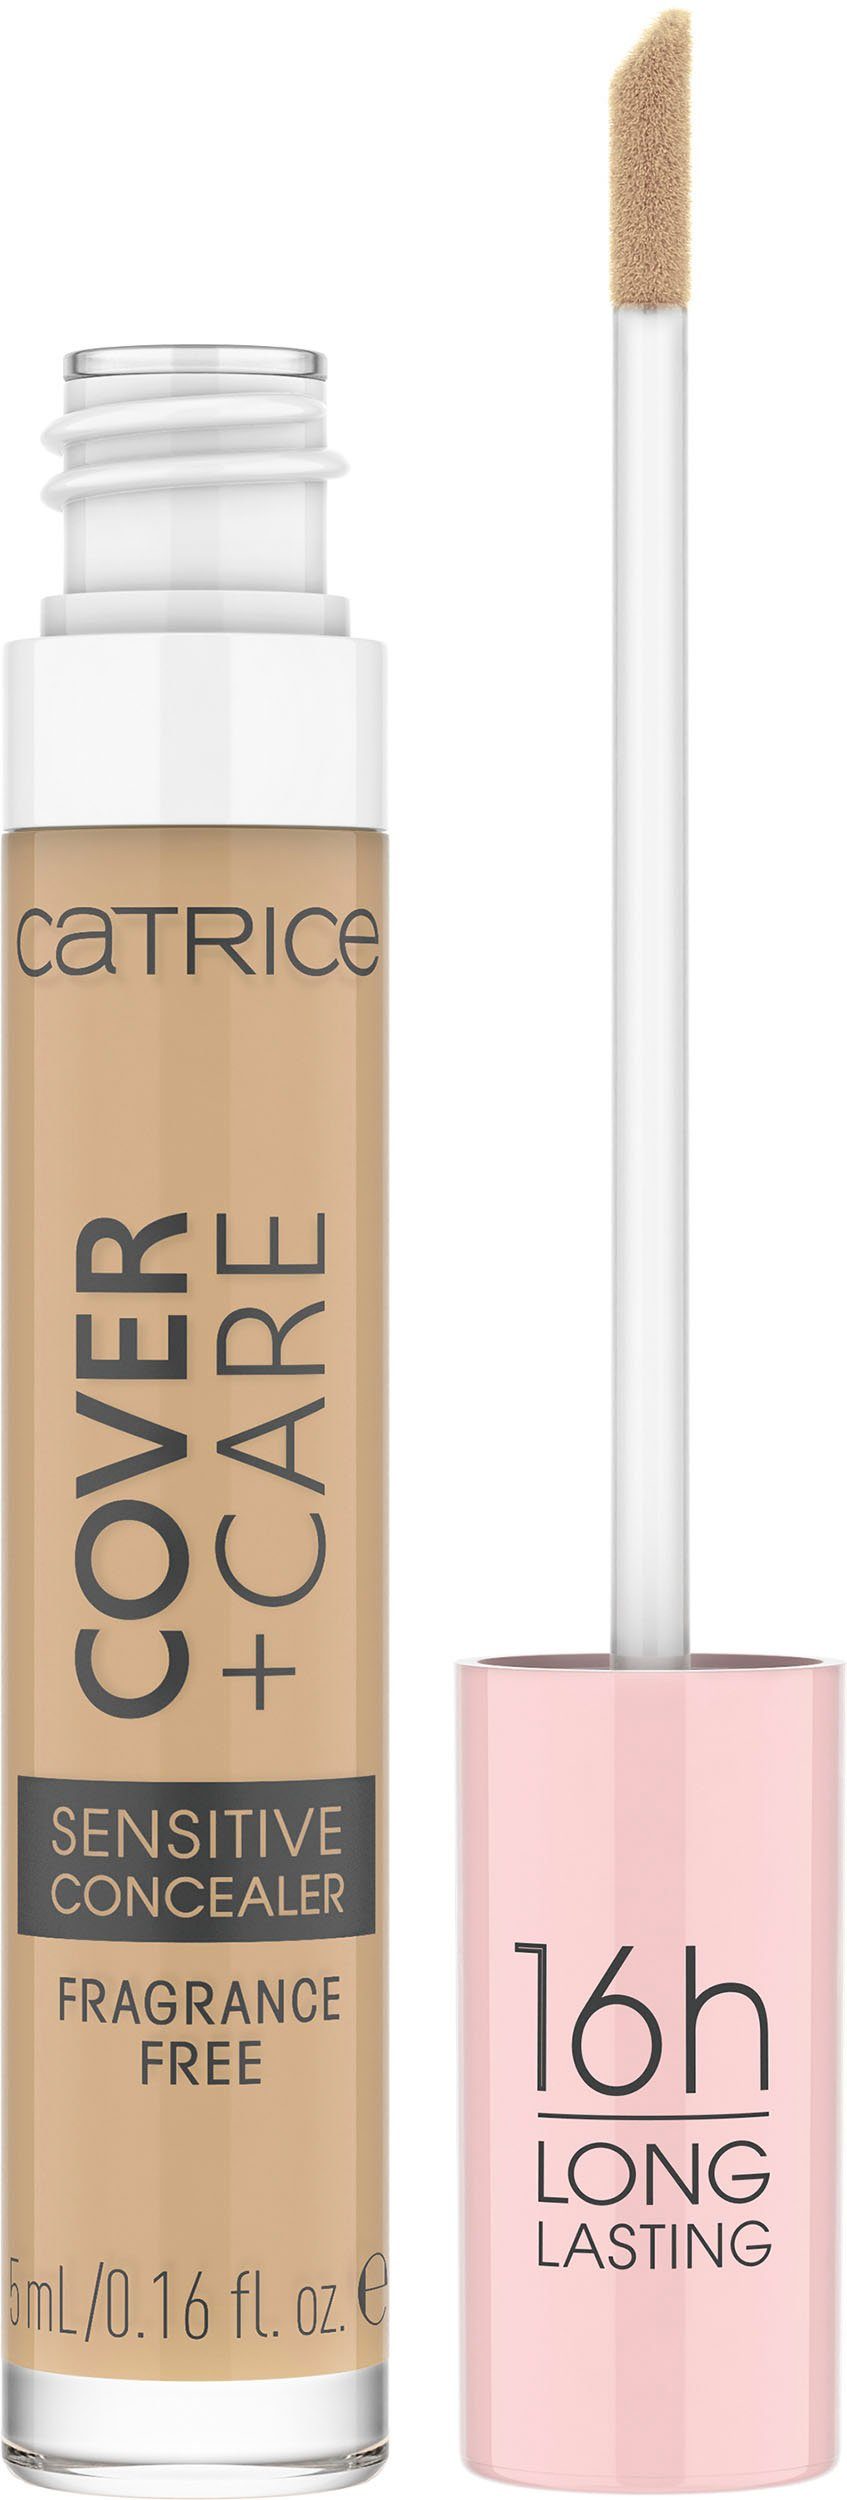 Concealer Catrice Cover Catrice 3-tlg. Sensitive Concealer, Care nude 030N +